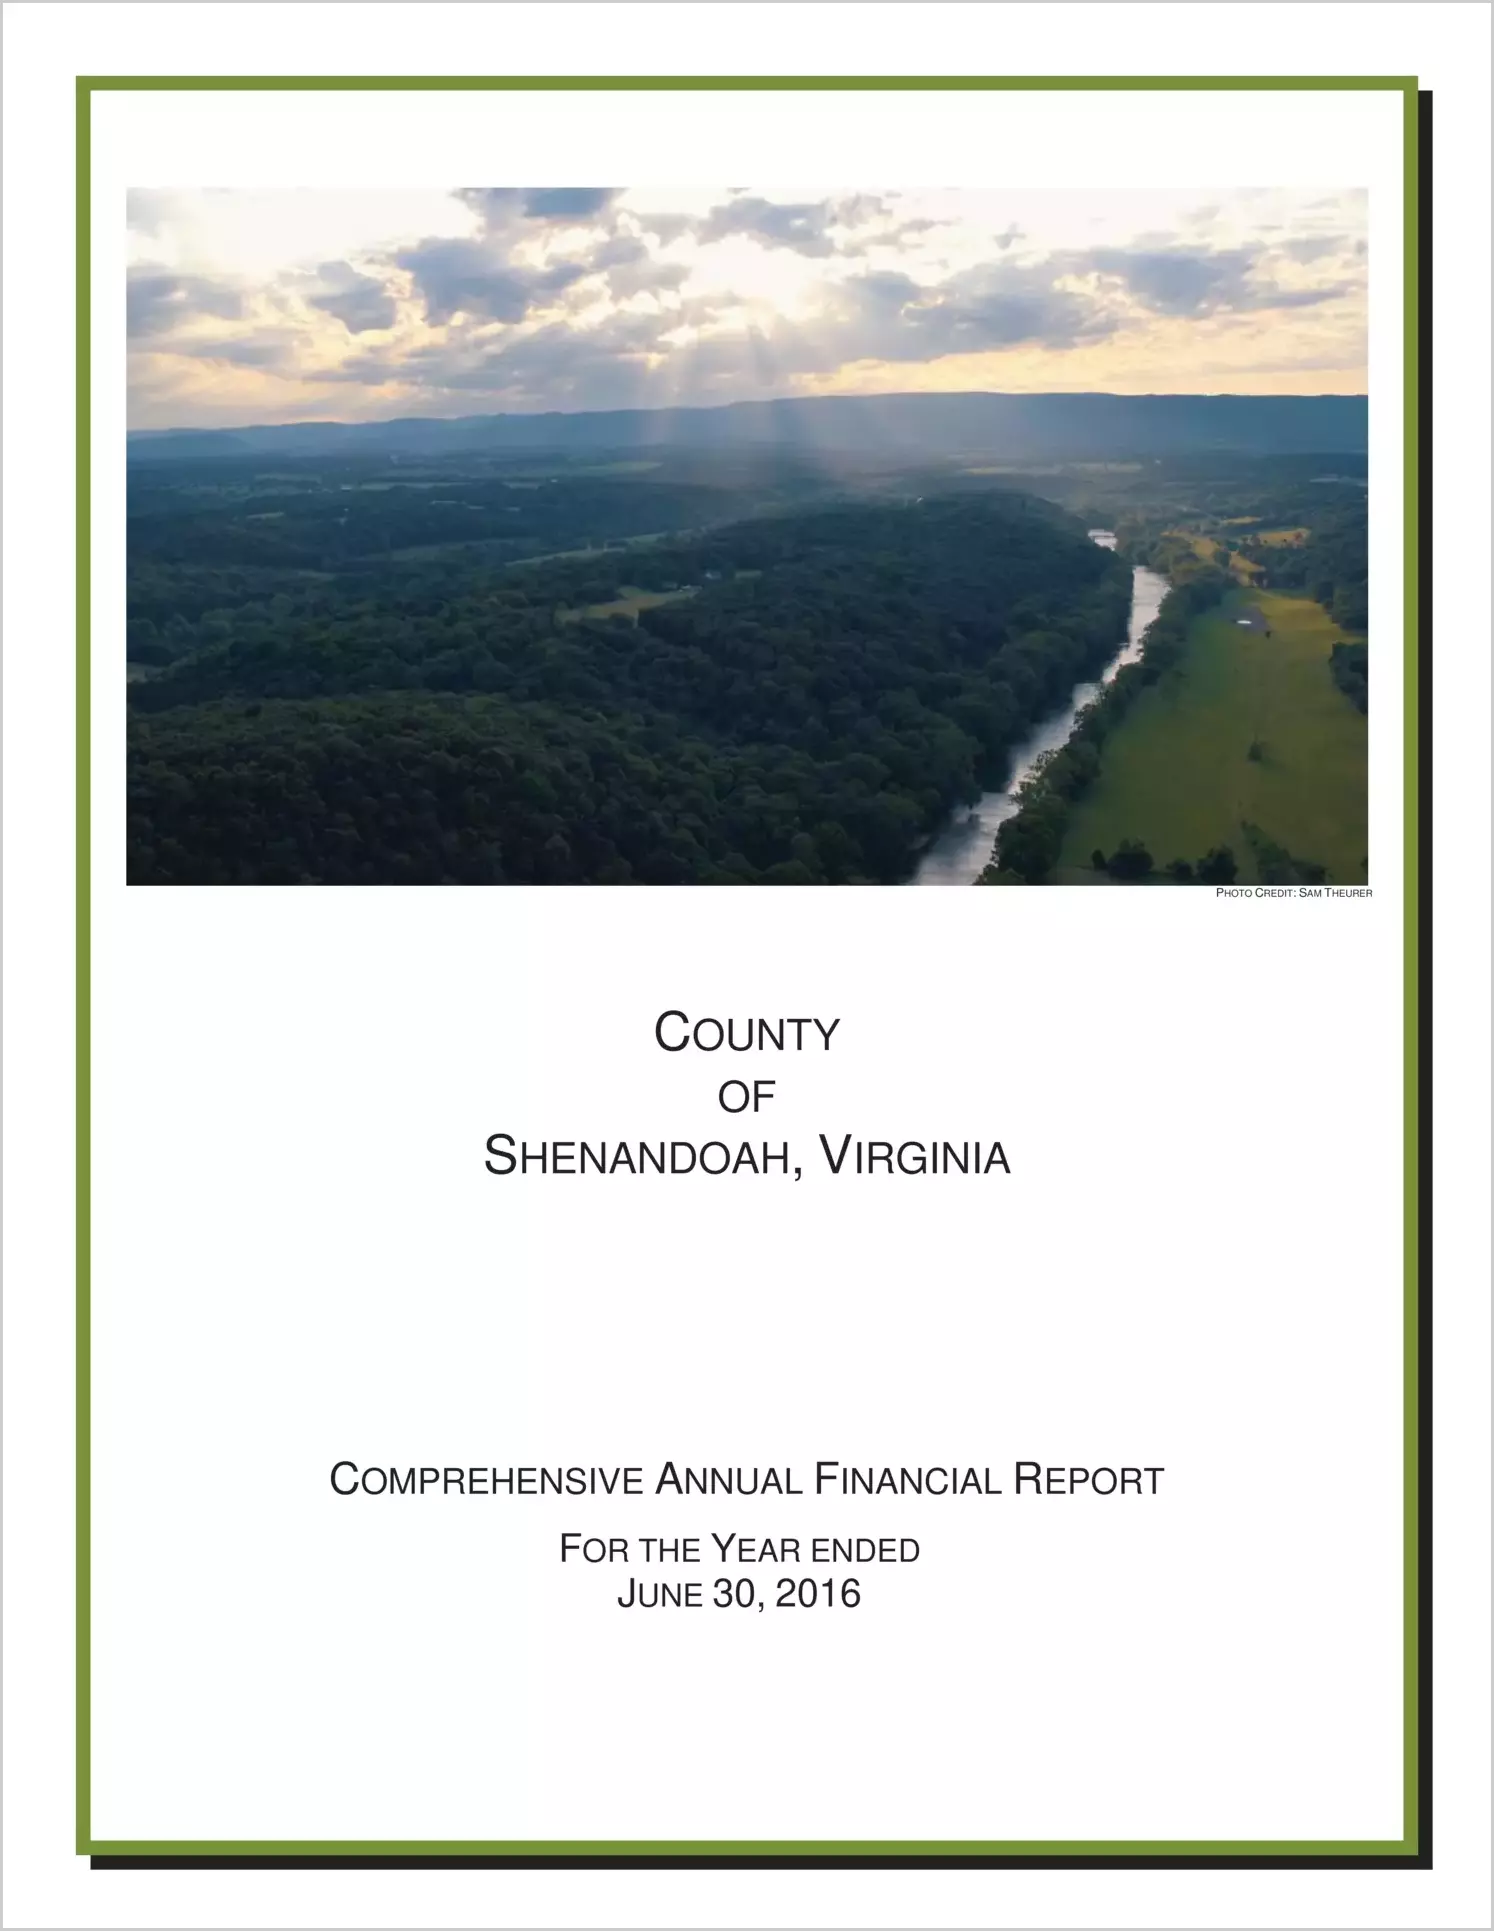 2016 Annual Financial Report for County of Shenandoah